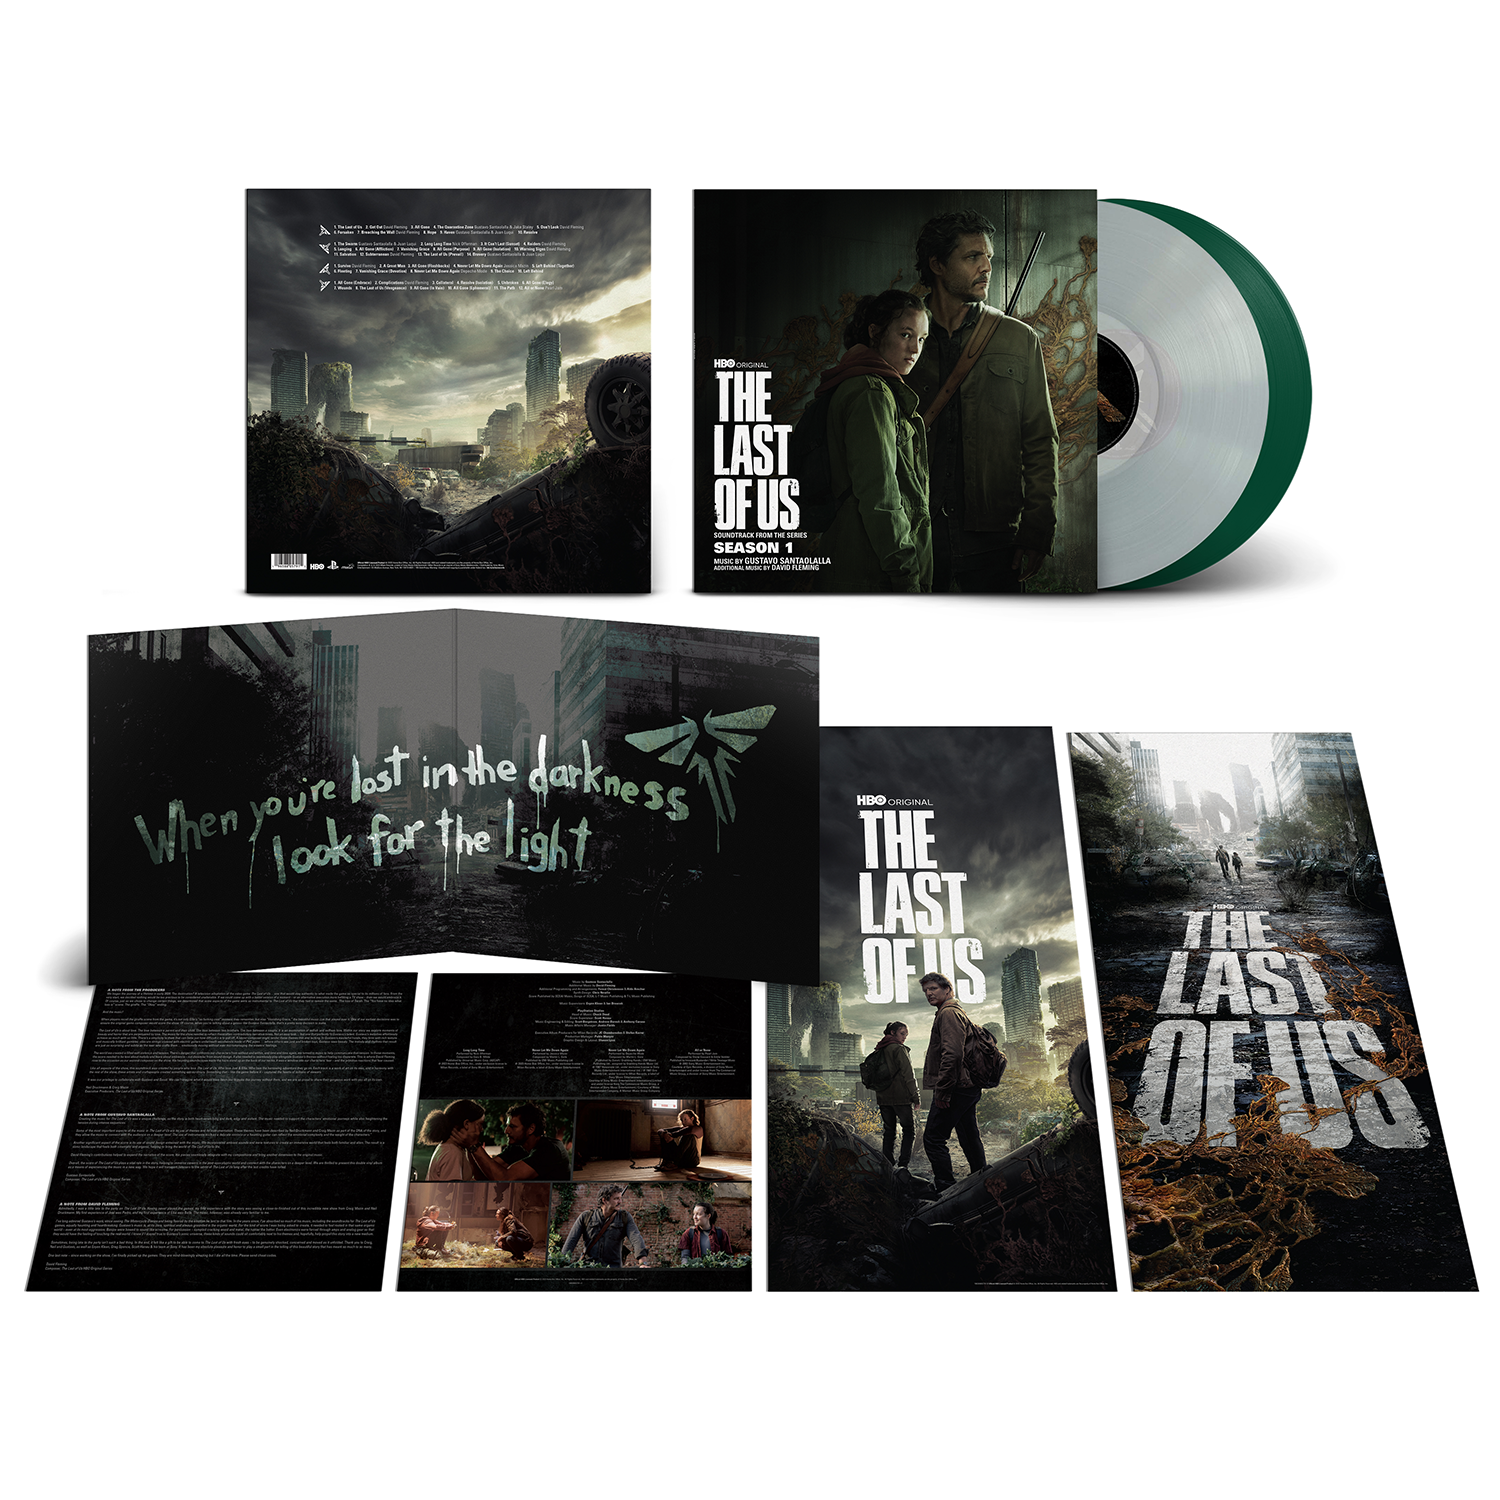 The Last of Us  The Last of Us: Season 1 (Soundtrack from the HBO